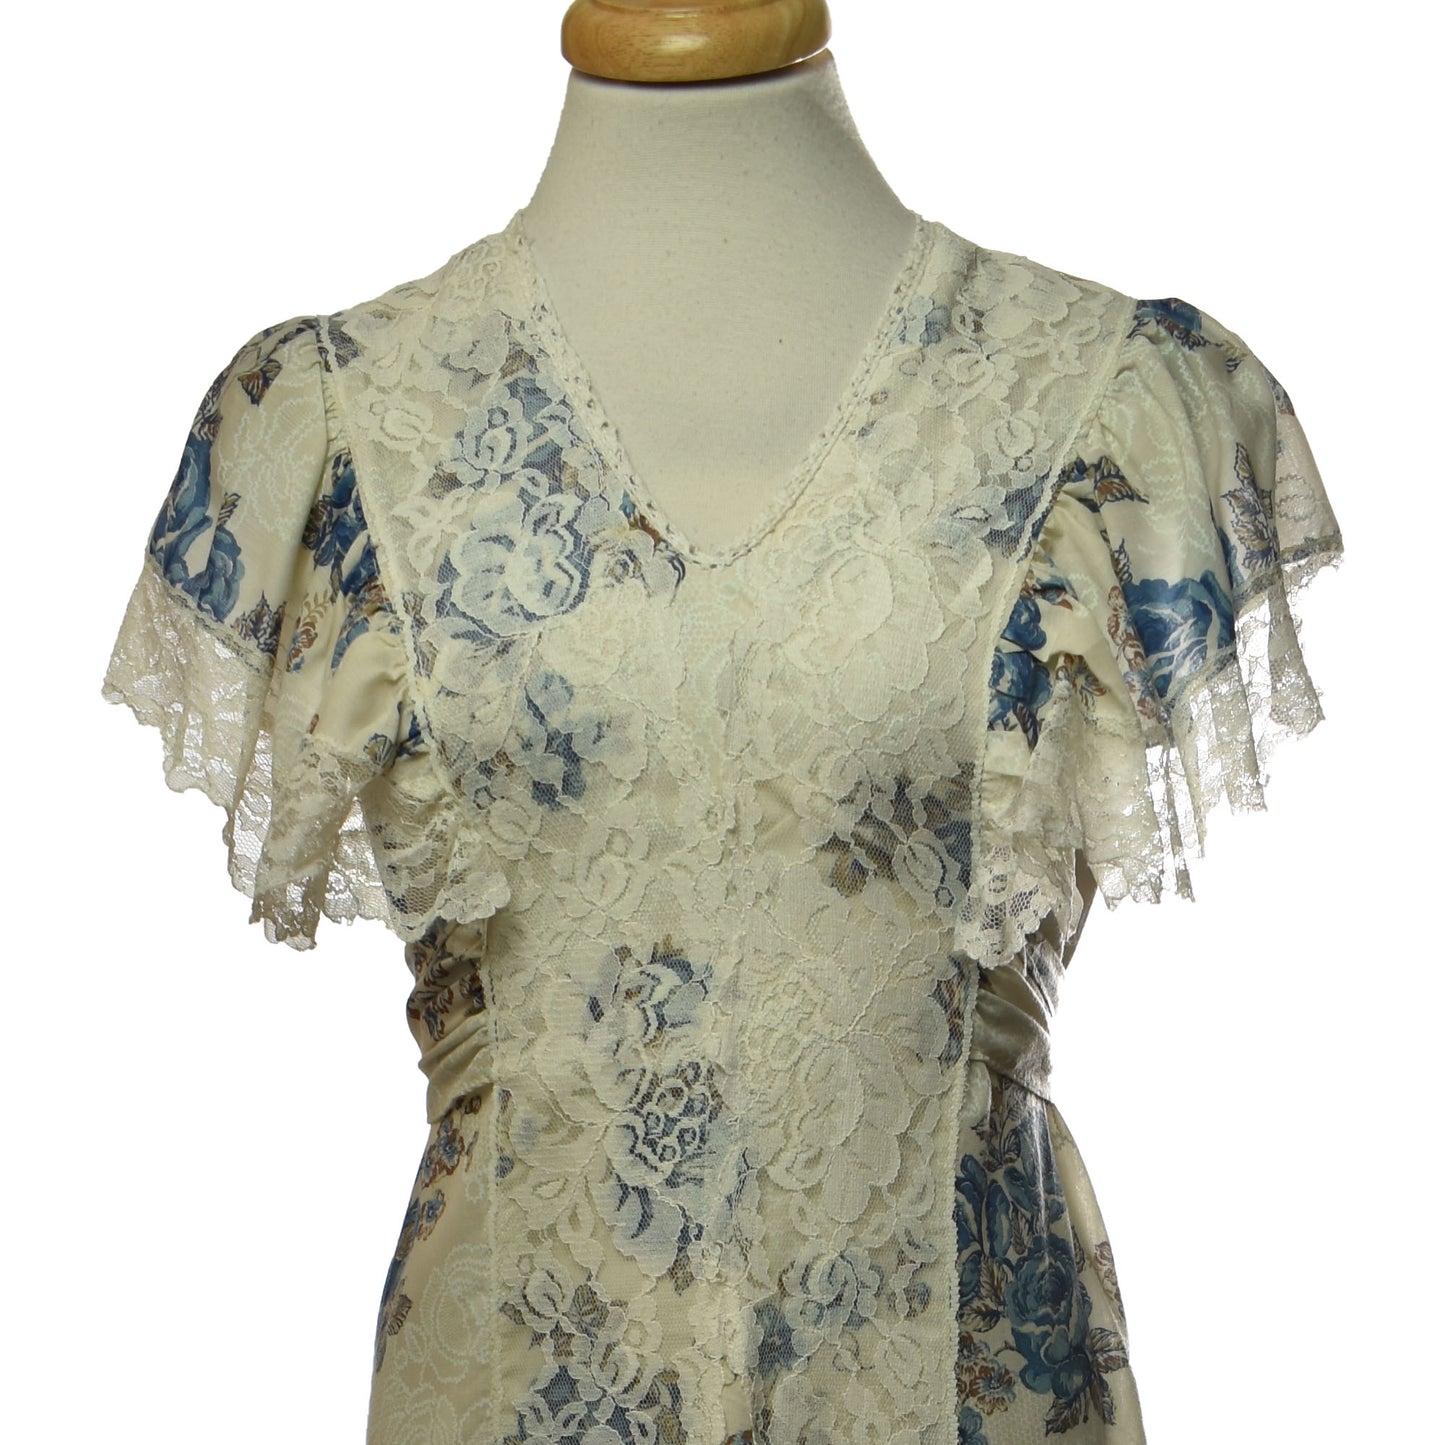 Vintage 70s Gunne Sax Style Blue Floral Lace Prairie Dress With Lap Over Ruffled Sleeve